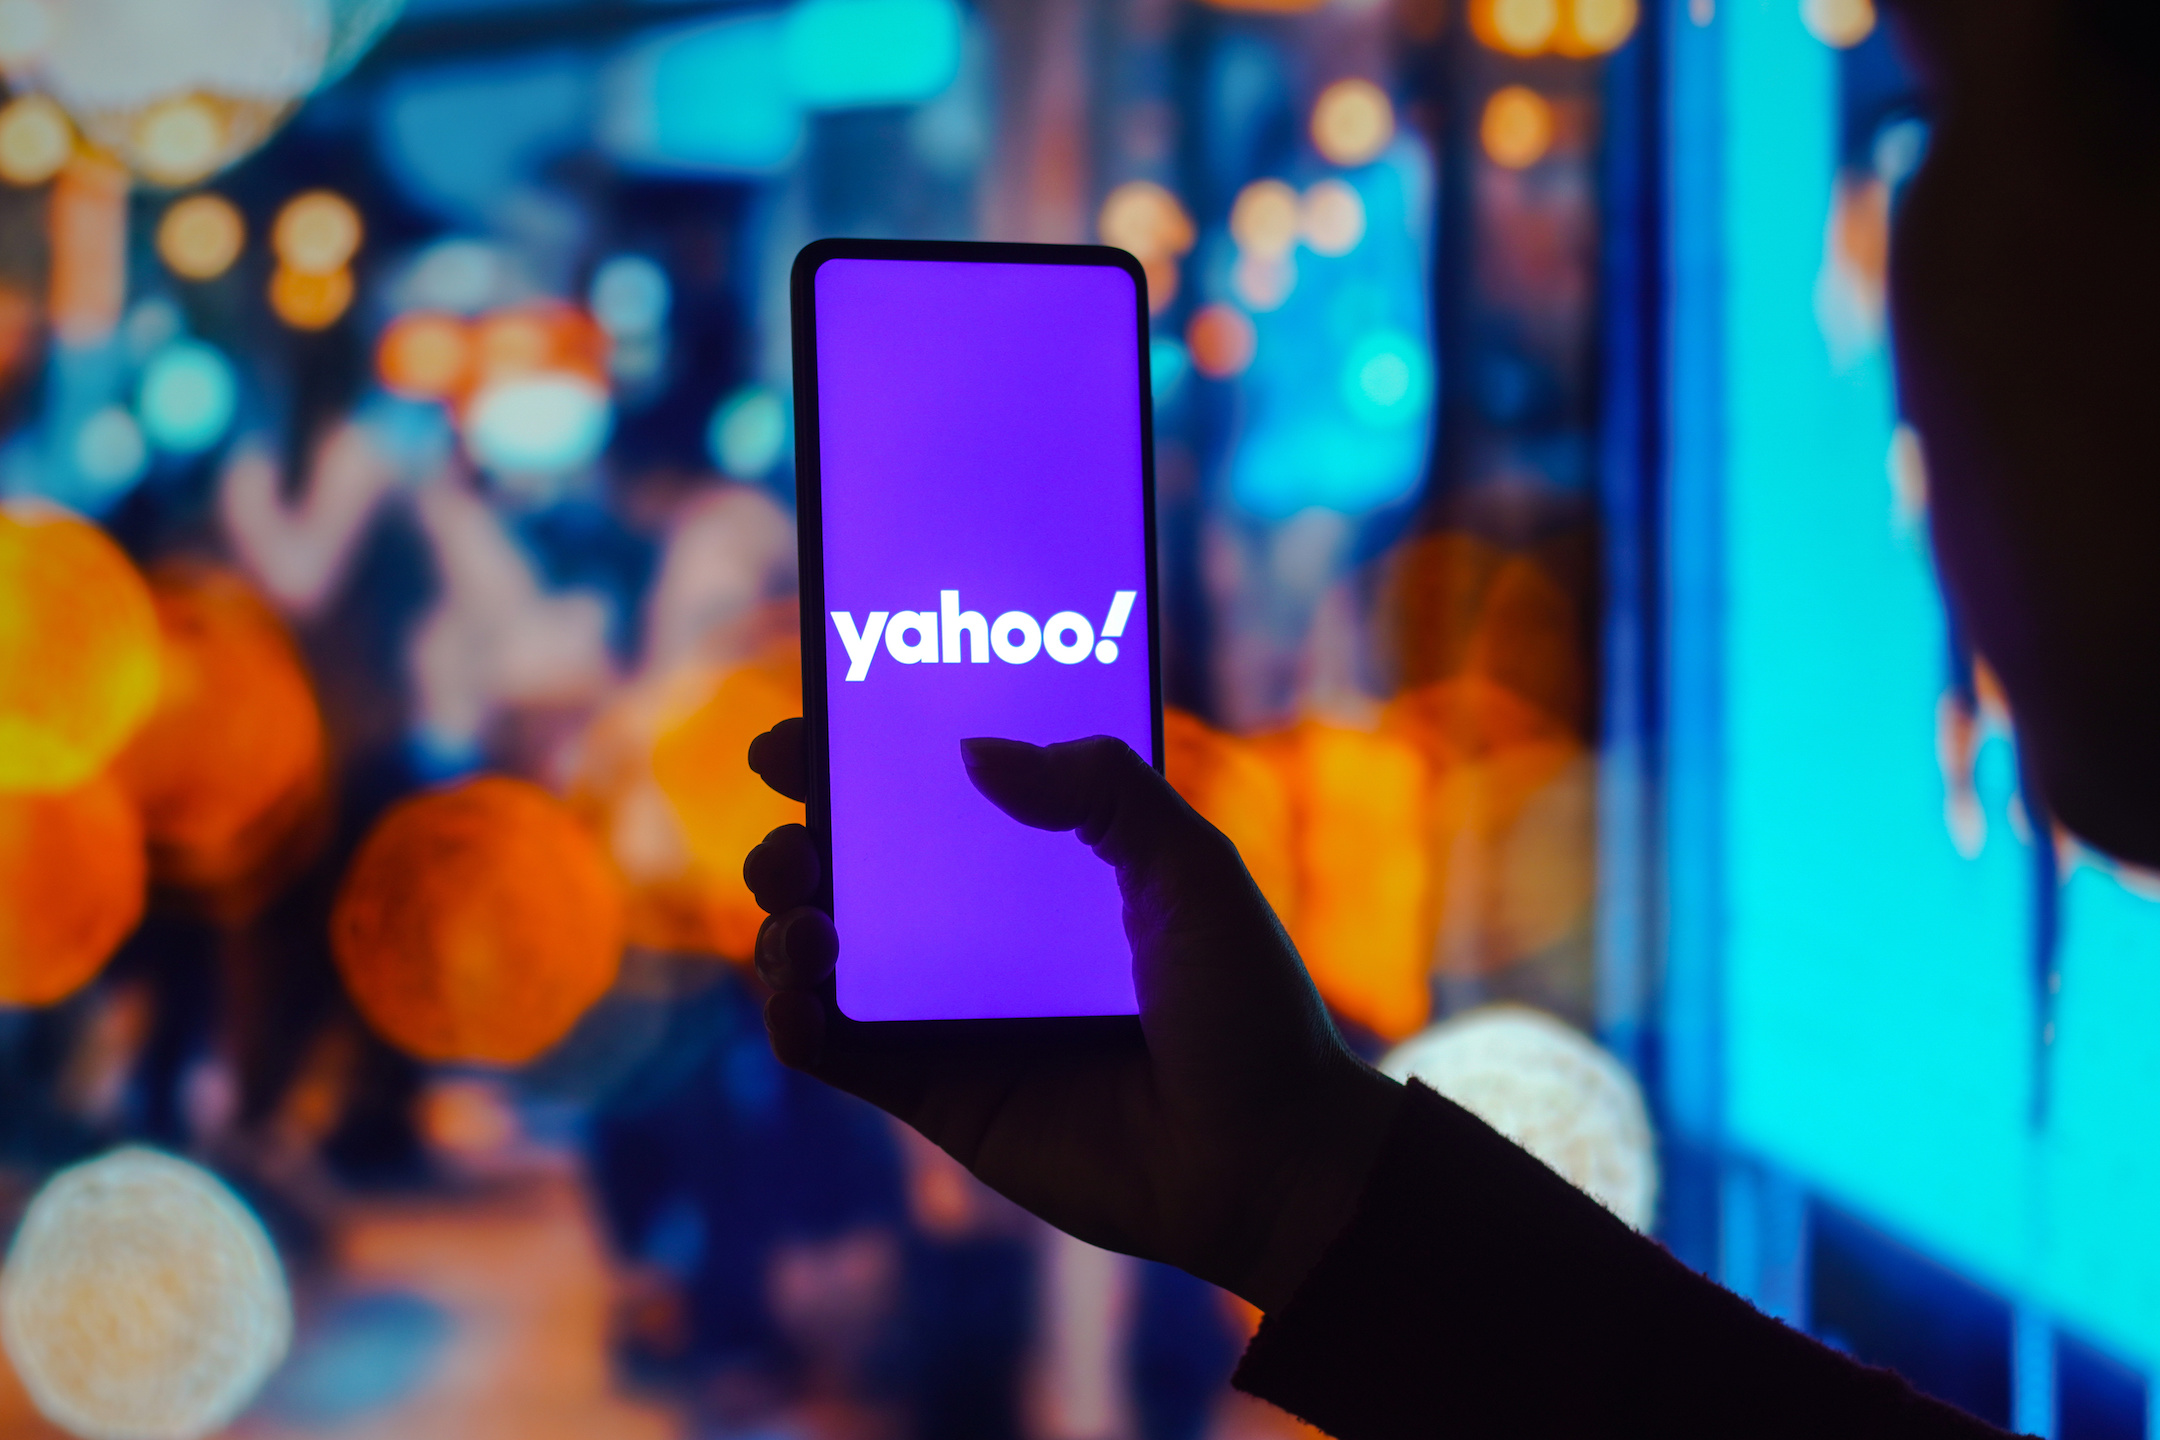 Yahoo Mail Makes Saving Time and Money Easier Than Ever with New